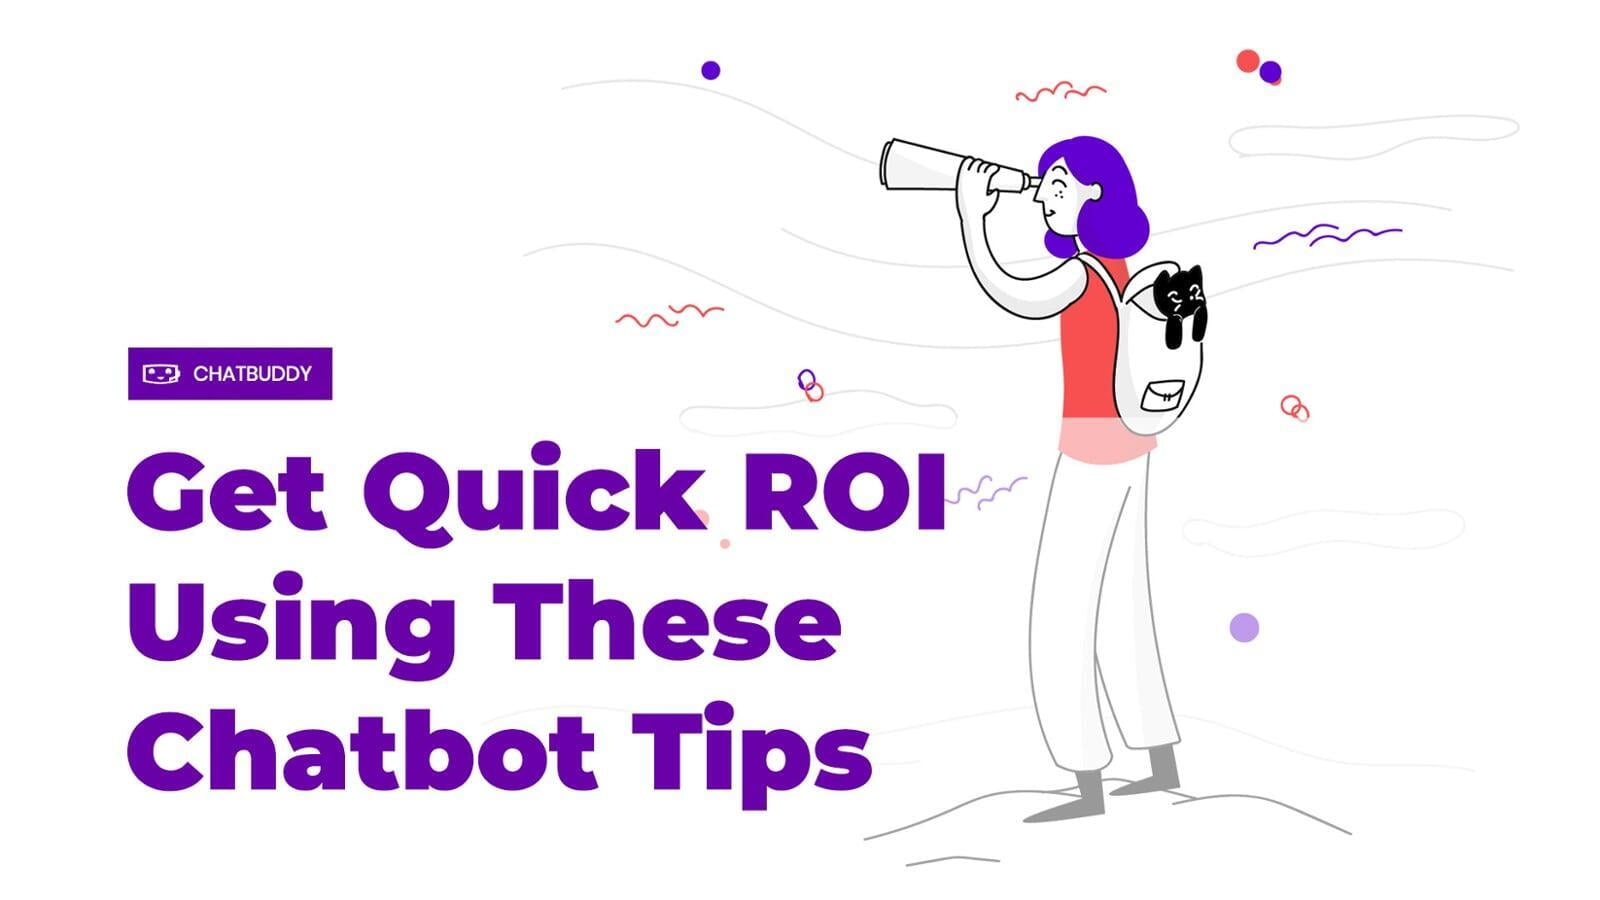 Get Quick ROI Using These Chatbot Tips